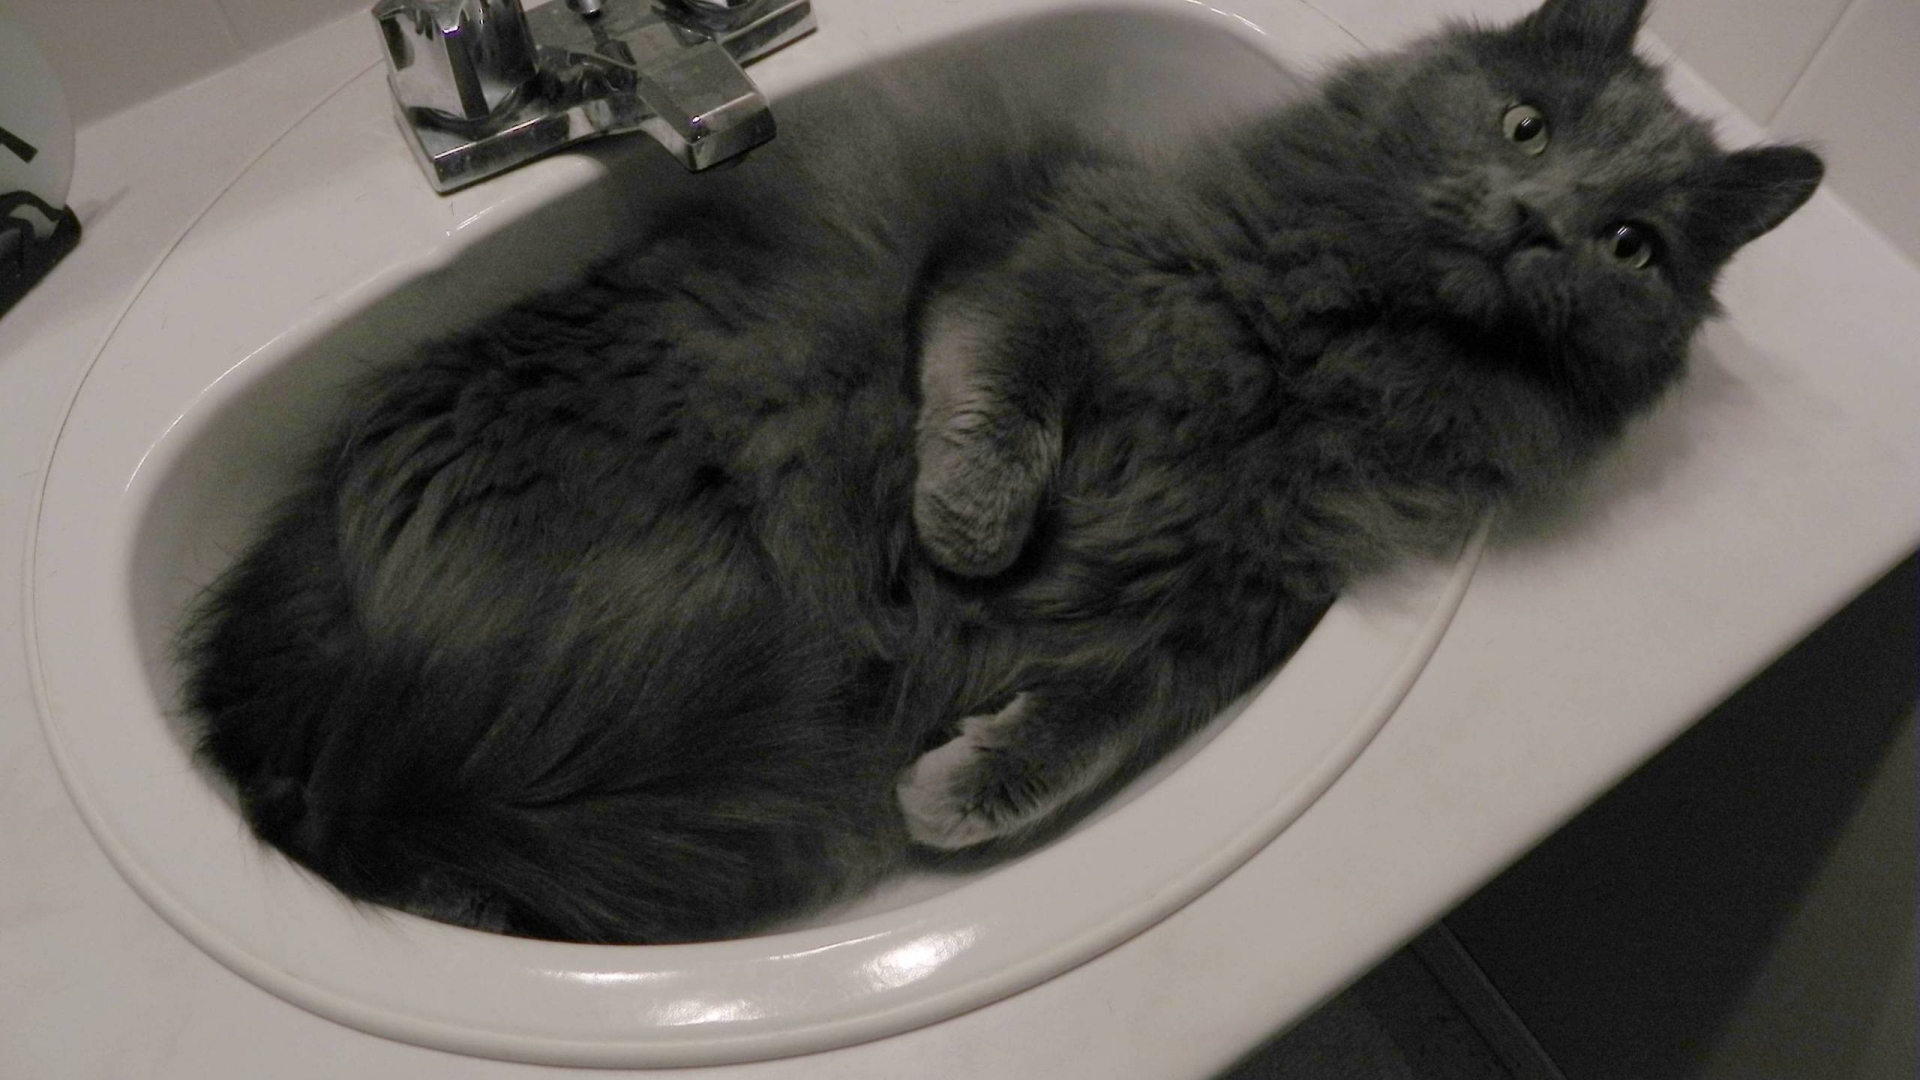 Nebelung Cat in Sink for 1920 x 1080 HDTV 1080p resolution